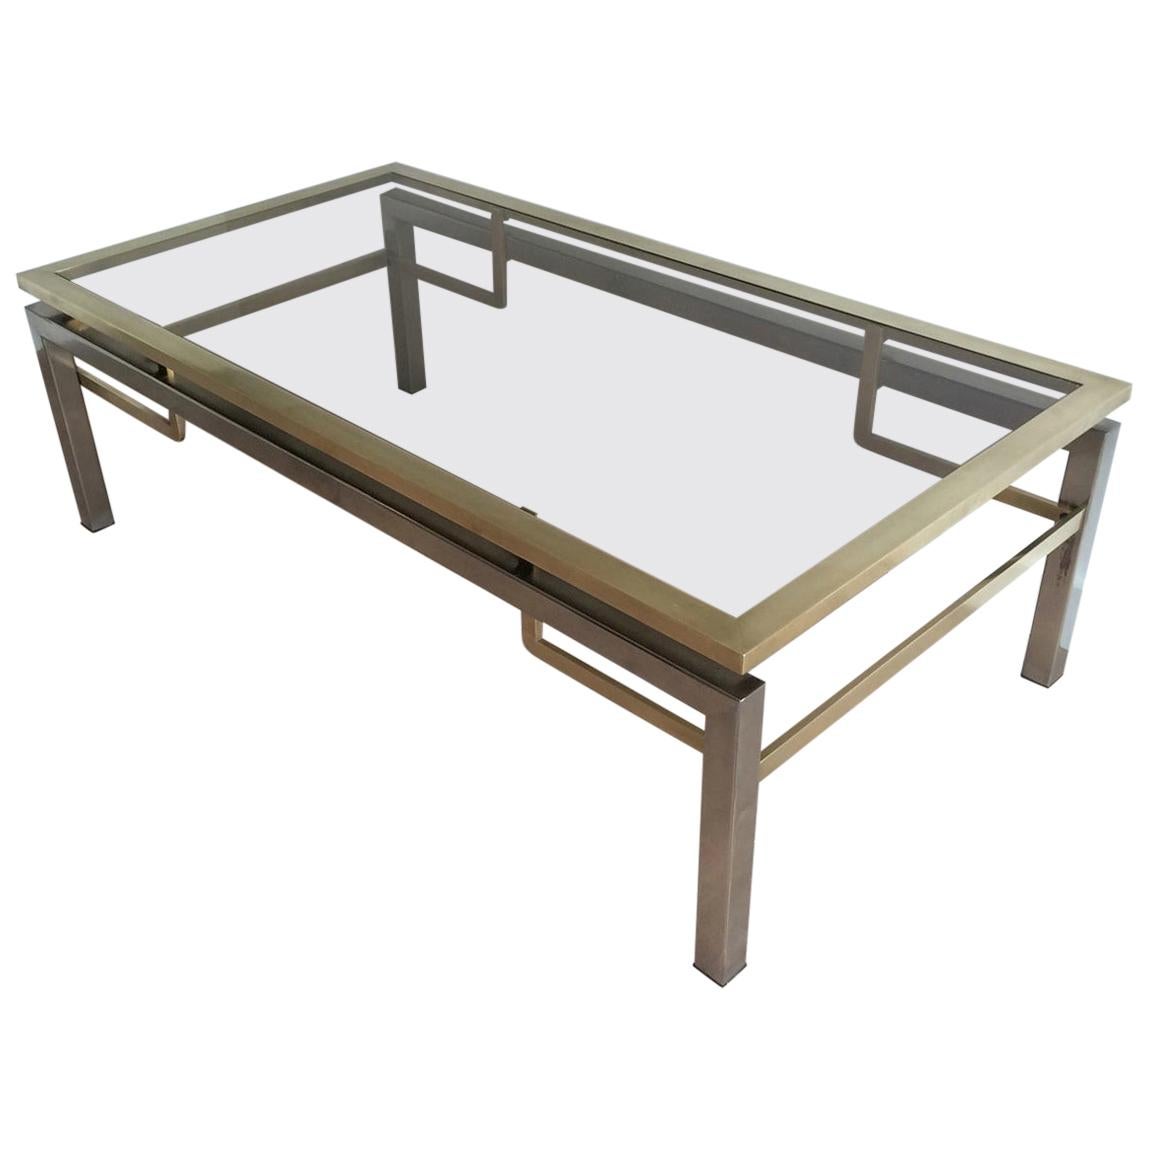 Guy Lefèvre for Maison Jansen, Brushed Steel and Brass Coffee Table, French